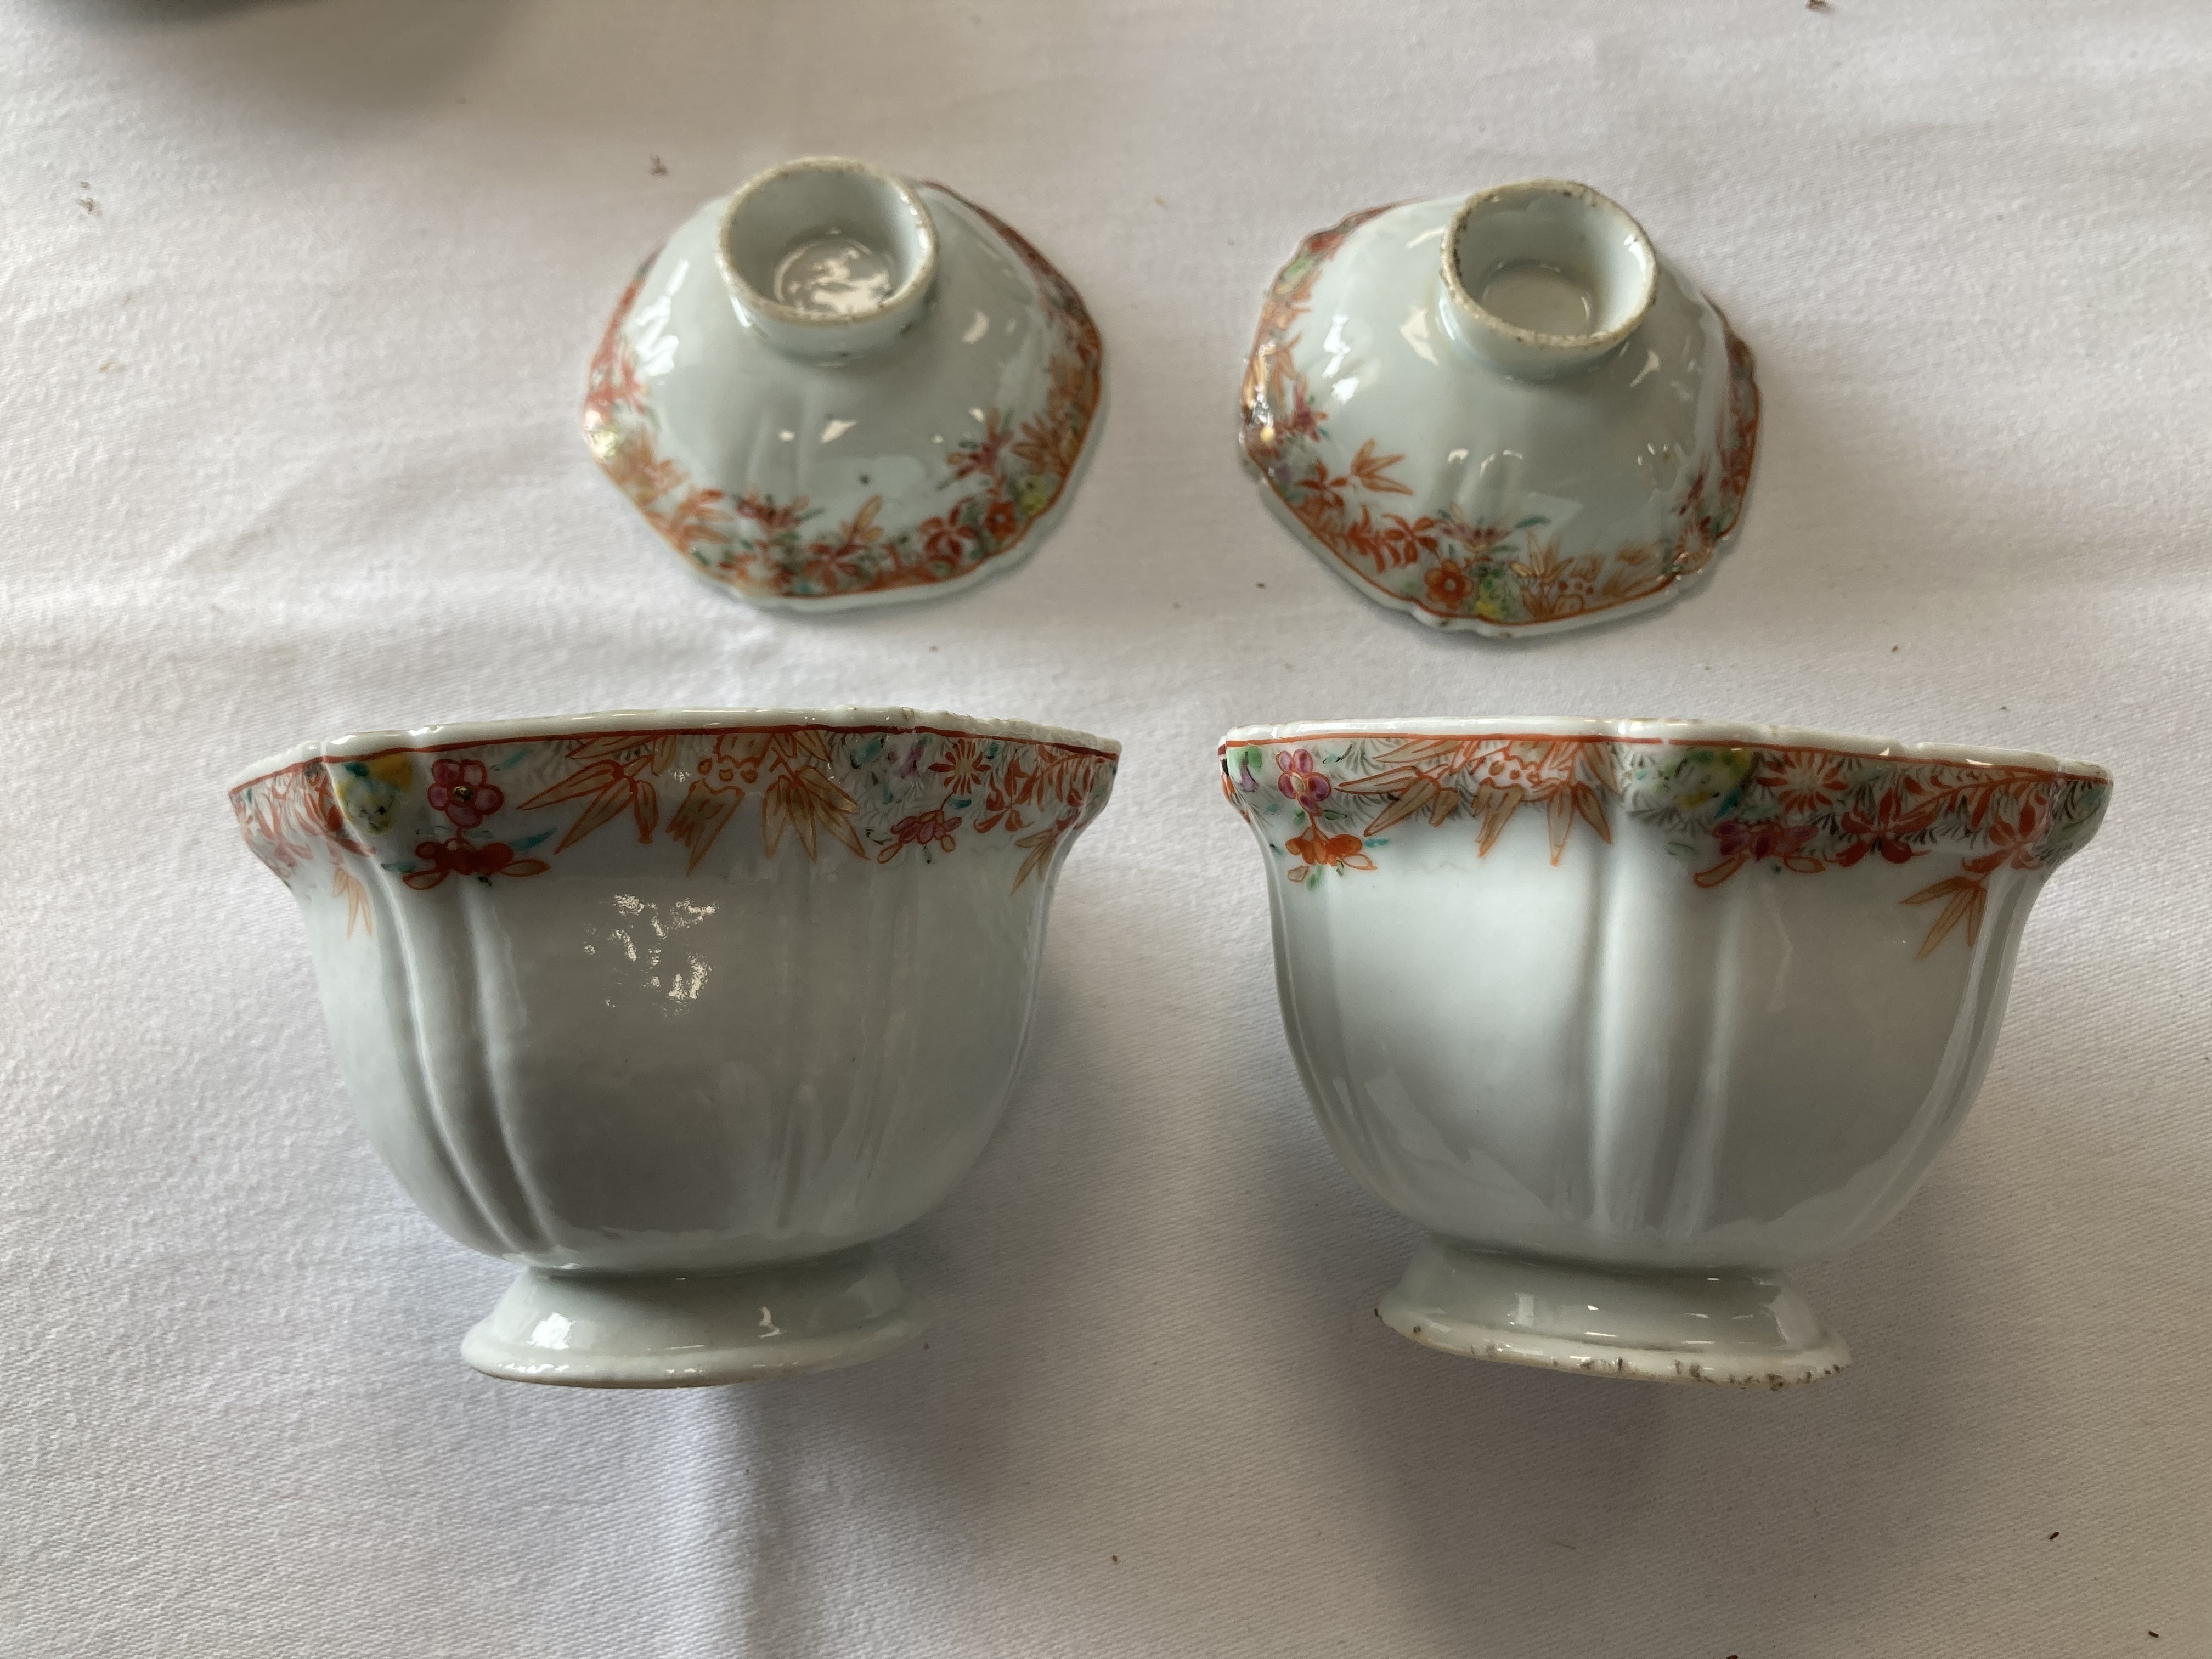 Two mid 18th century Chinese export porcelain hexagonal covered tea bowls and four saucers - Image 8 of 8